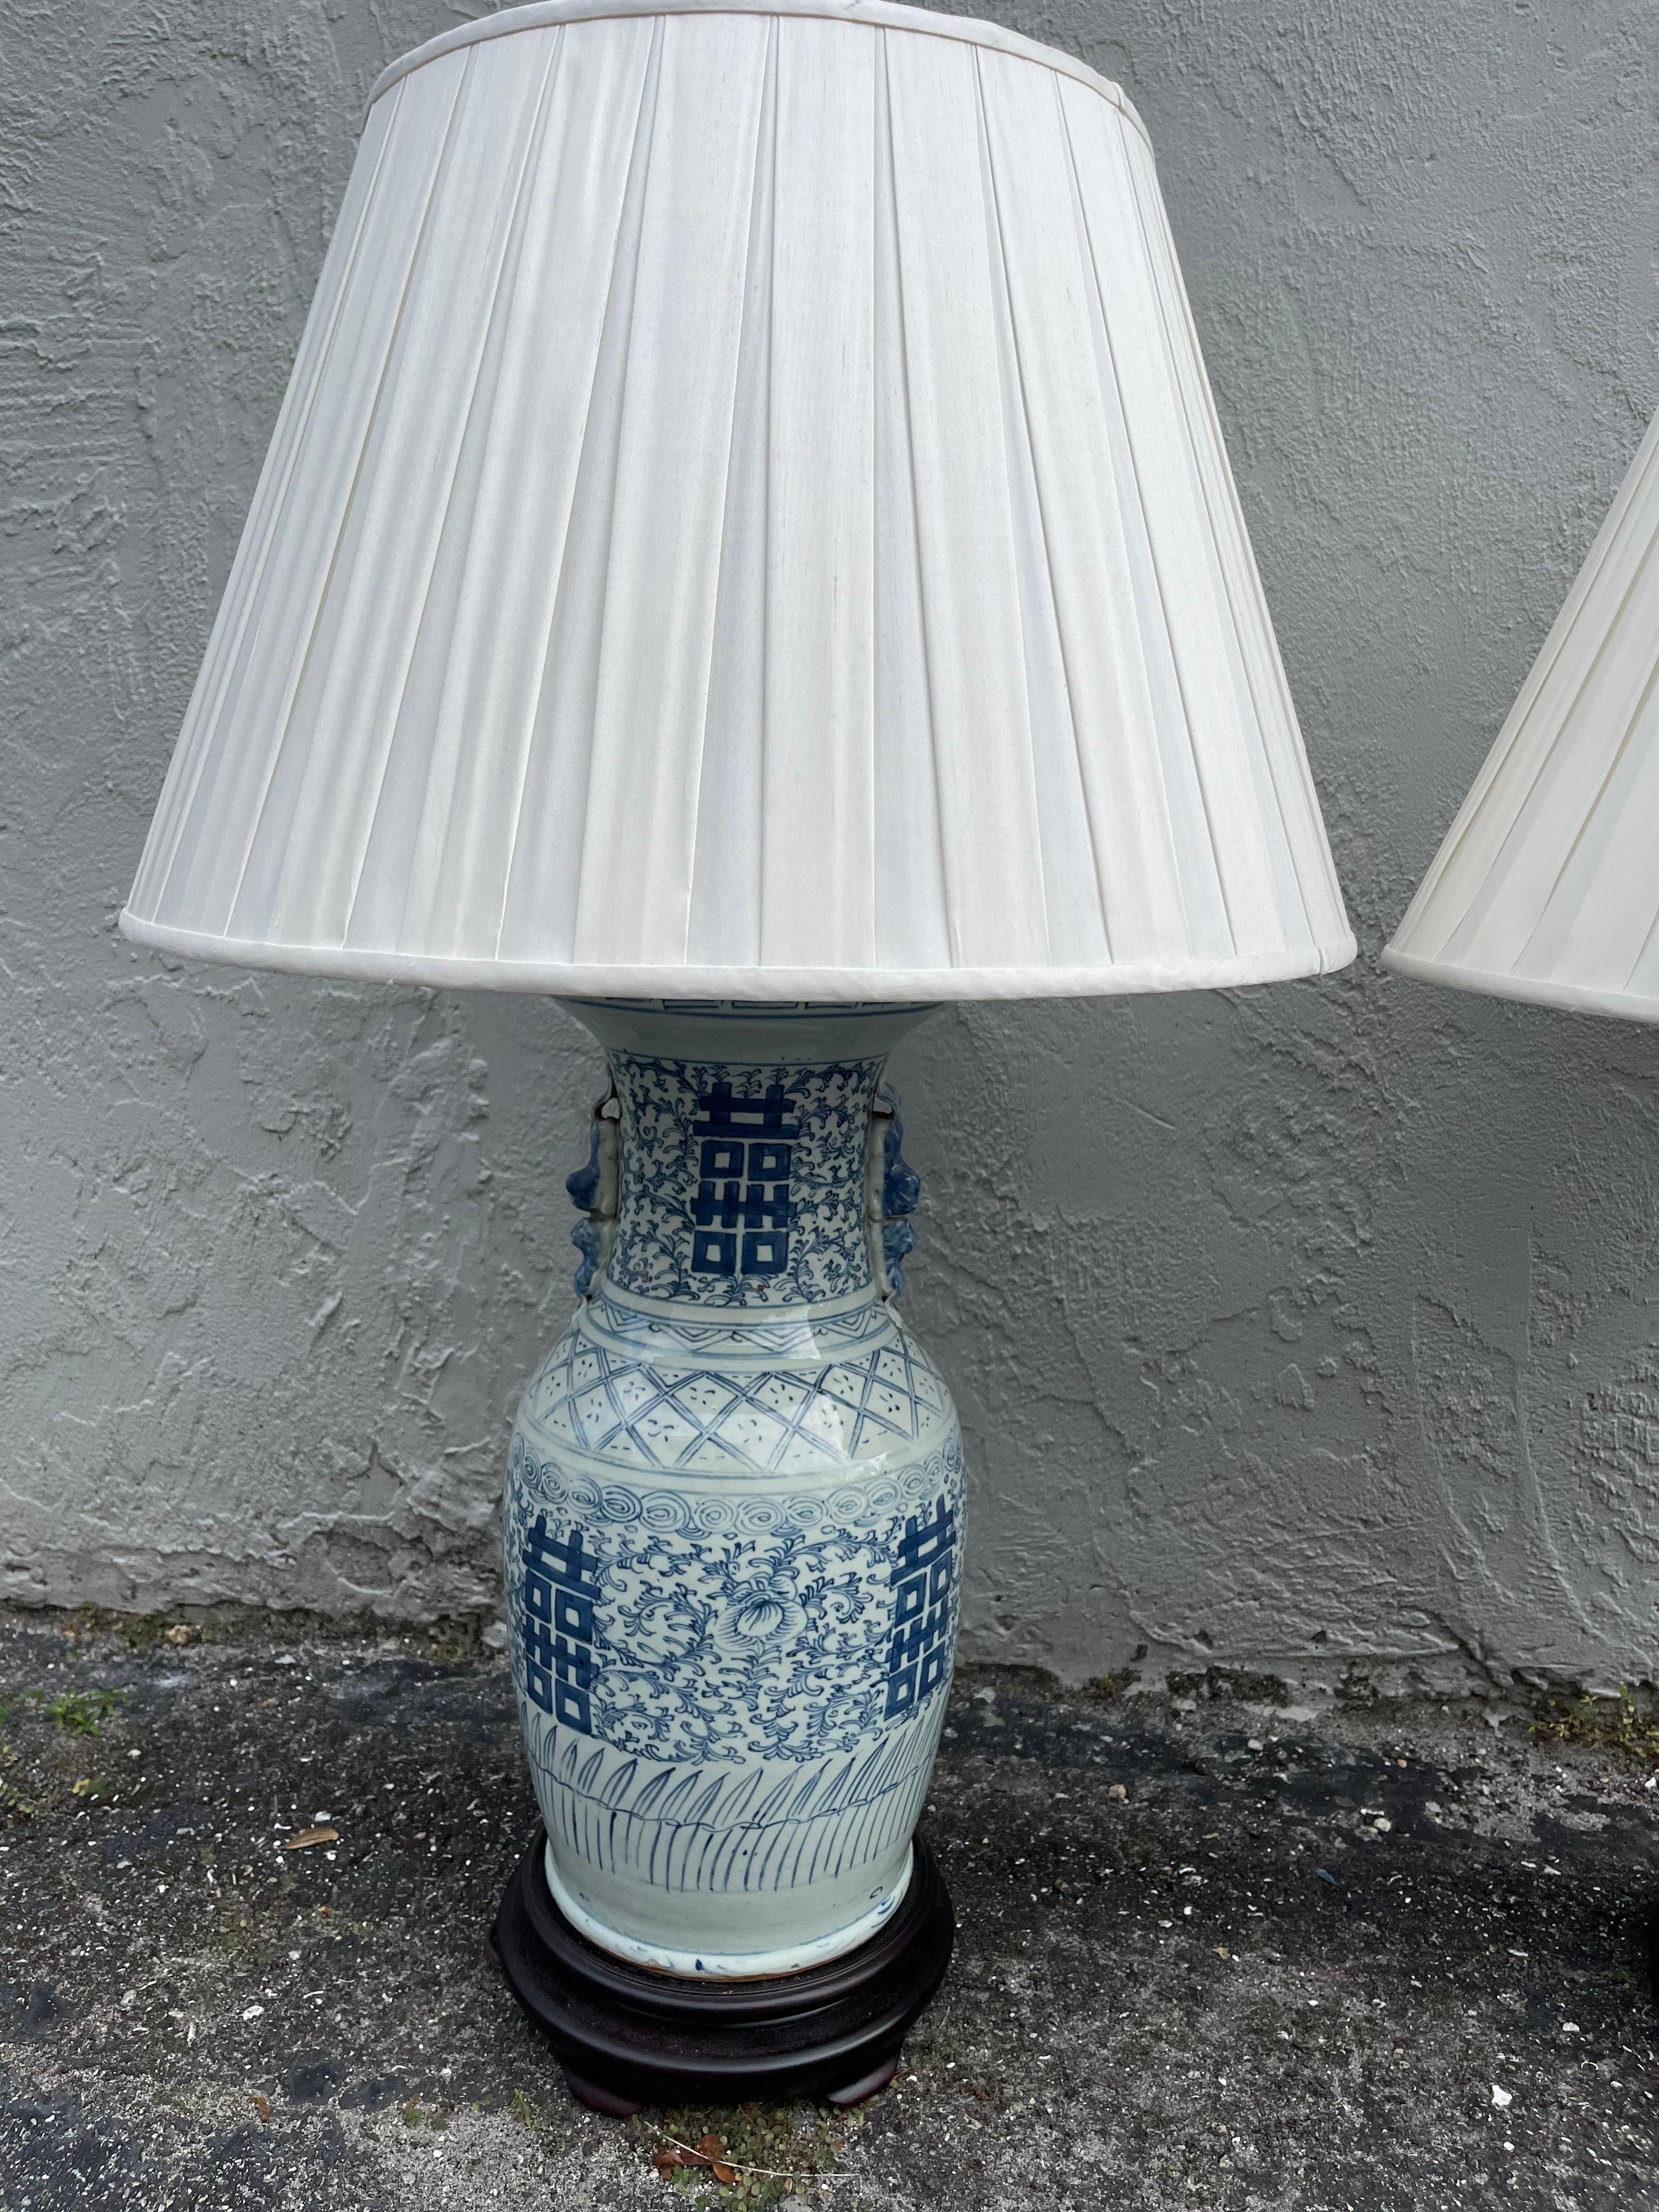 antique blue and white lamps